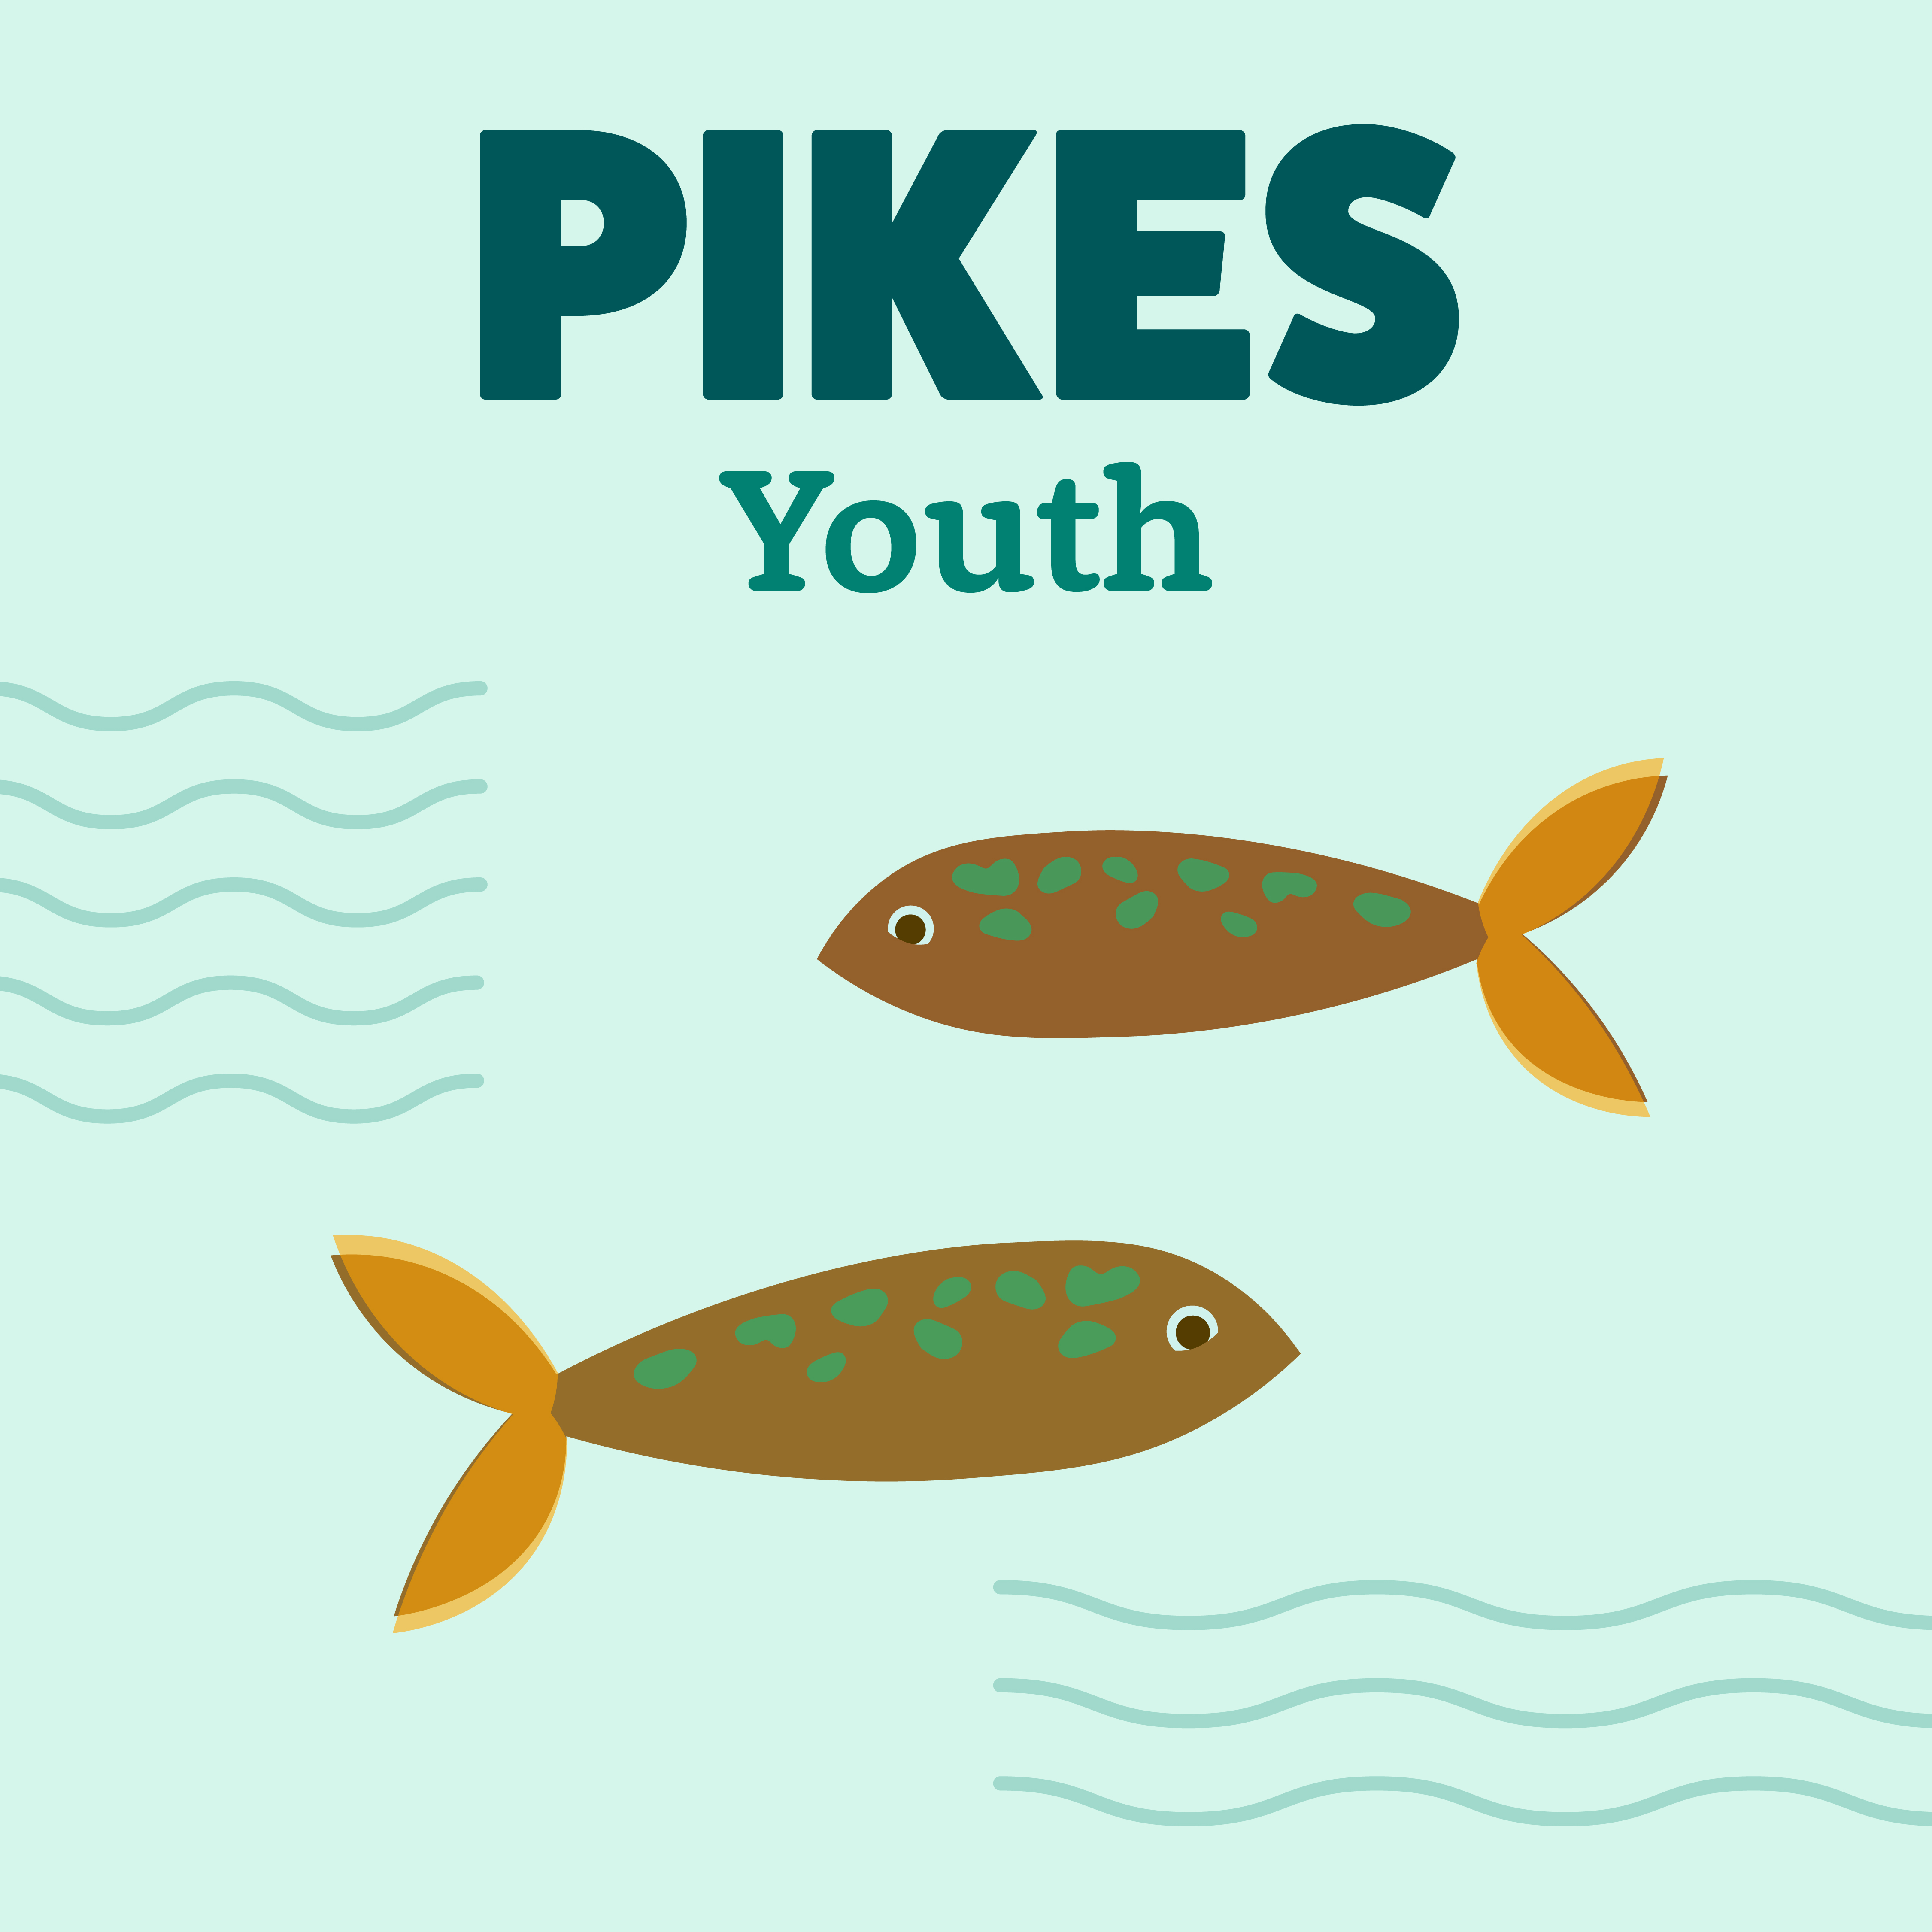 Illustration of two fish with text "Pike Youth"